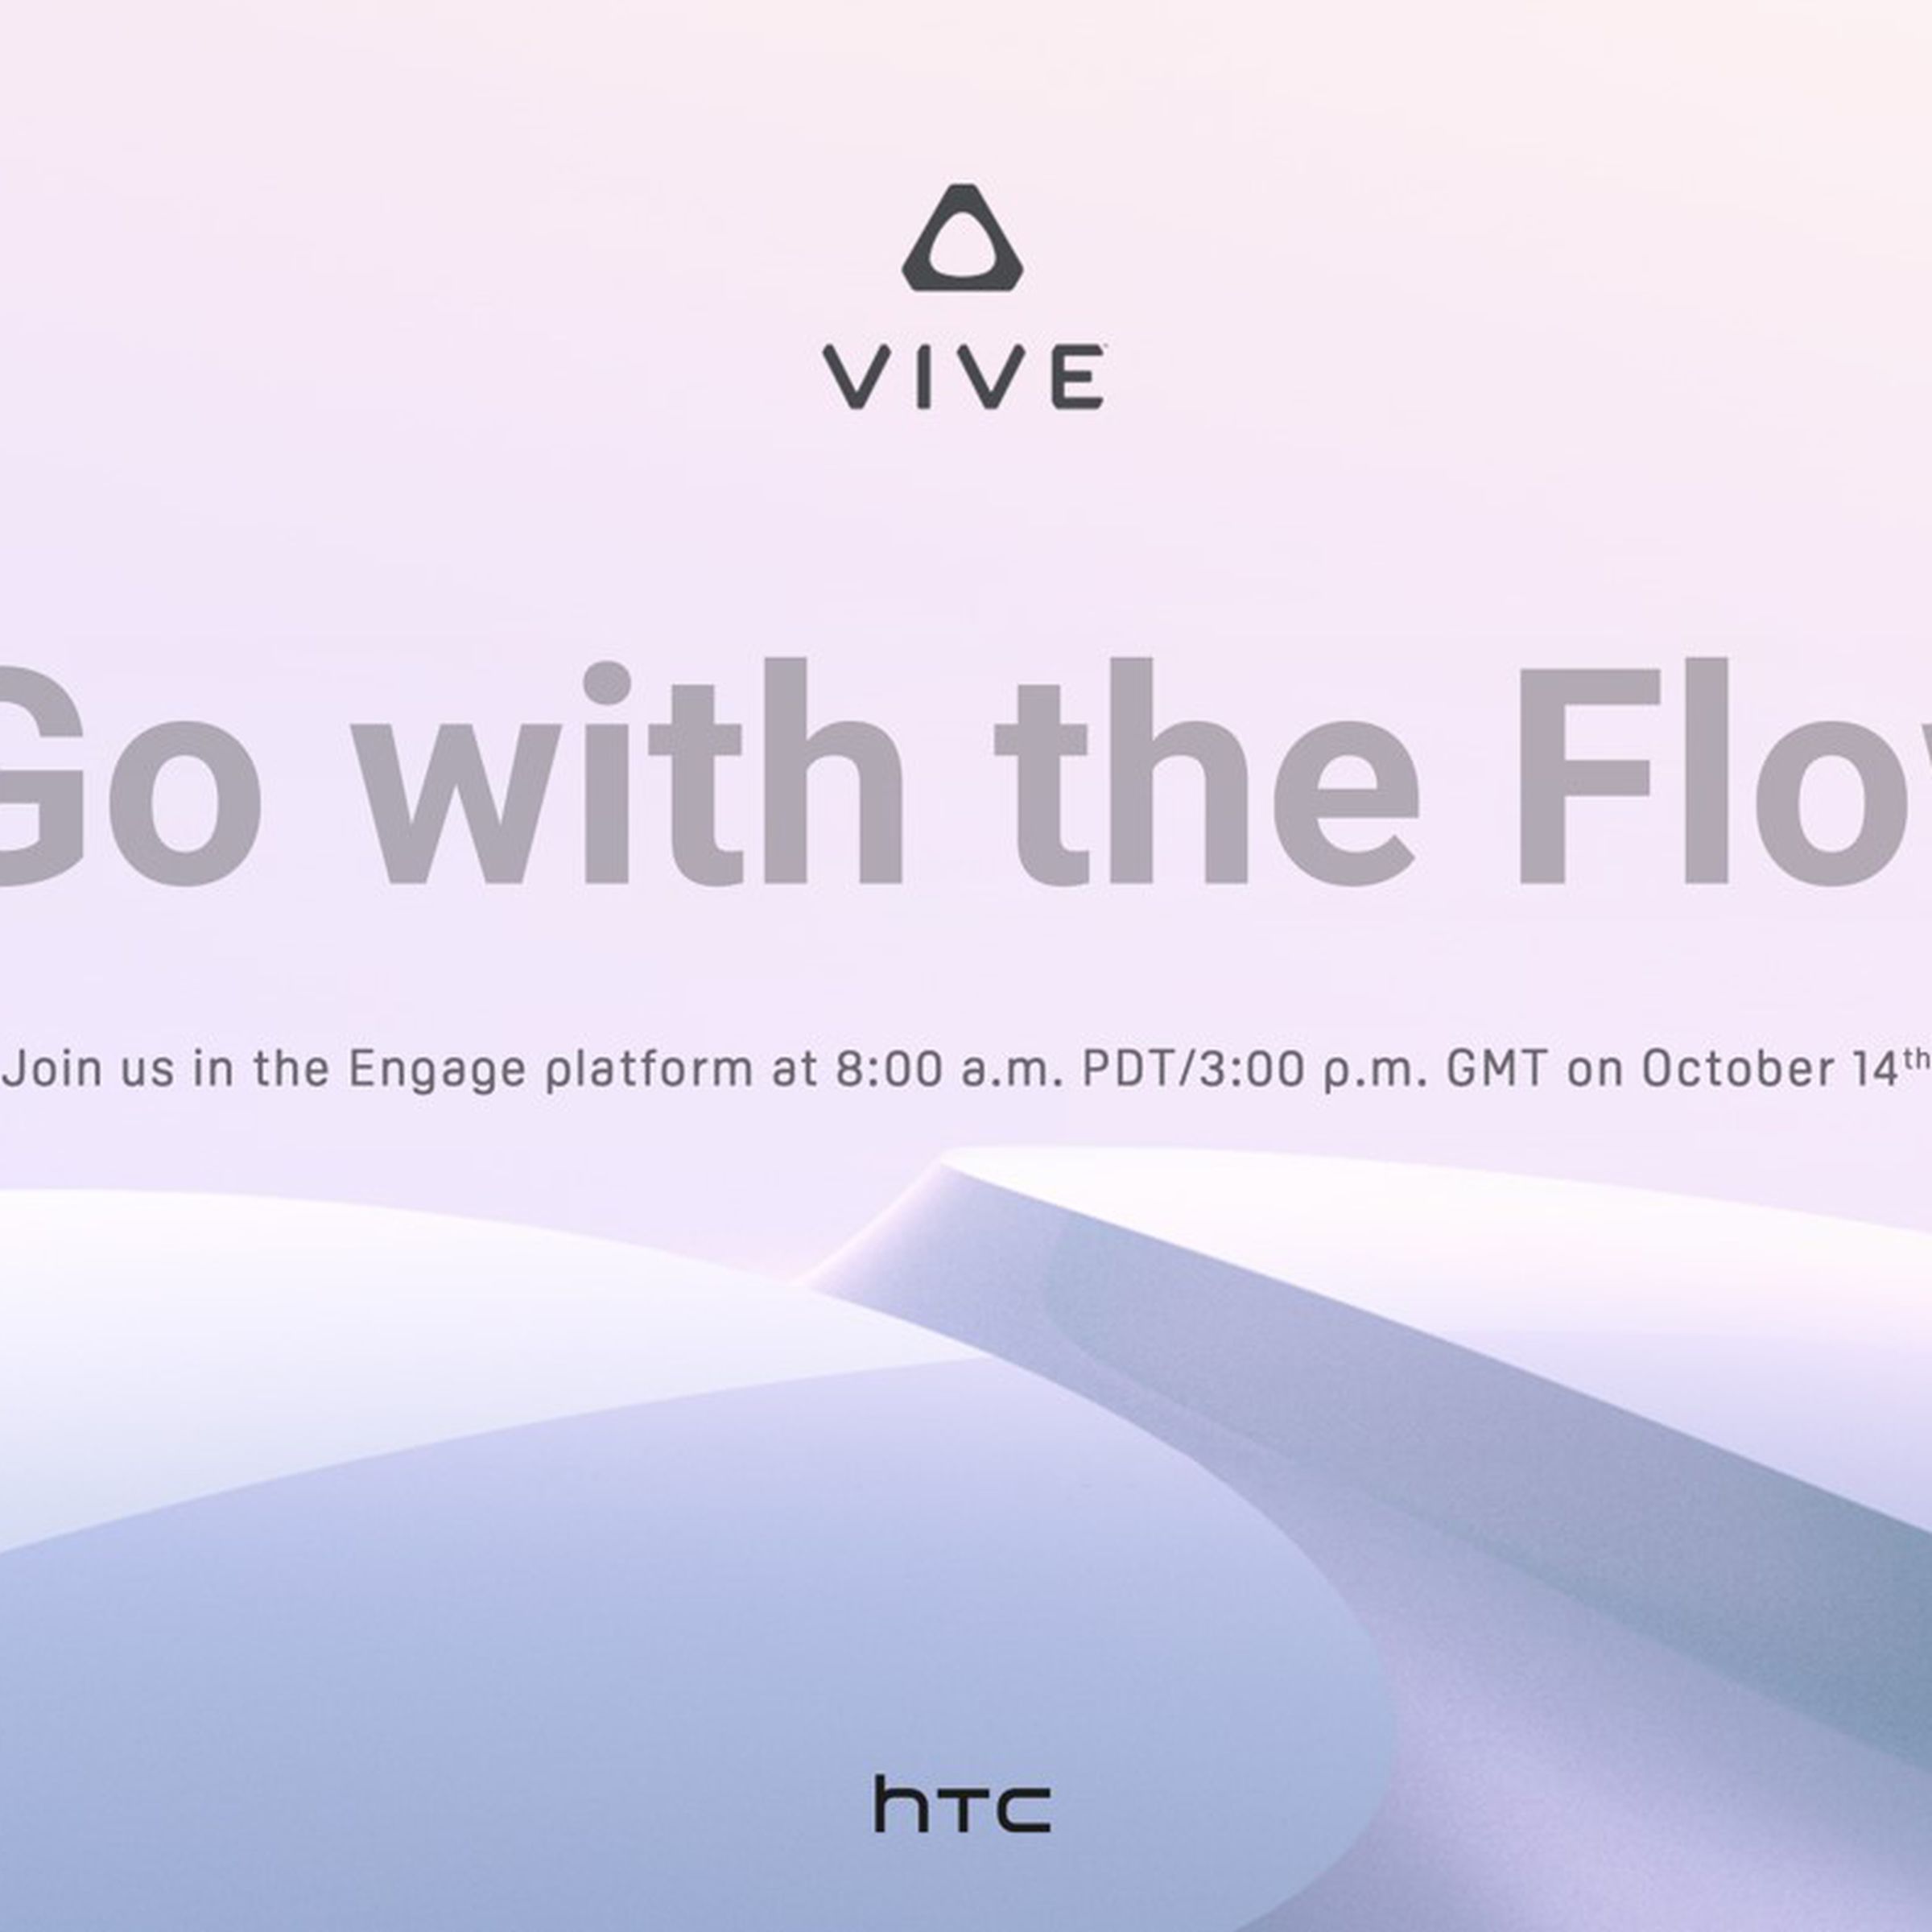 A promotional image for HTC’s upcoming event.